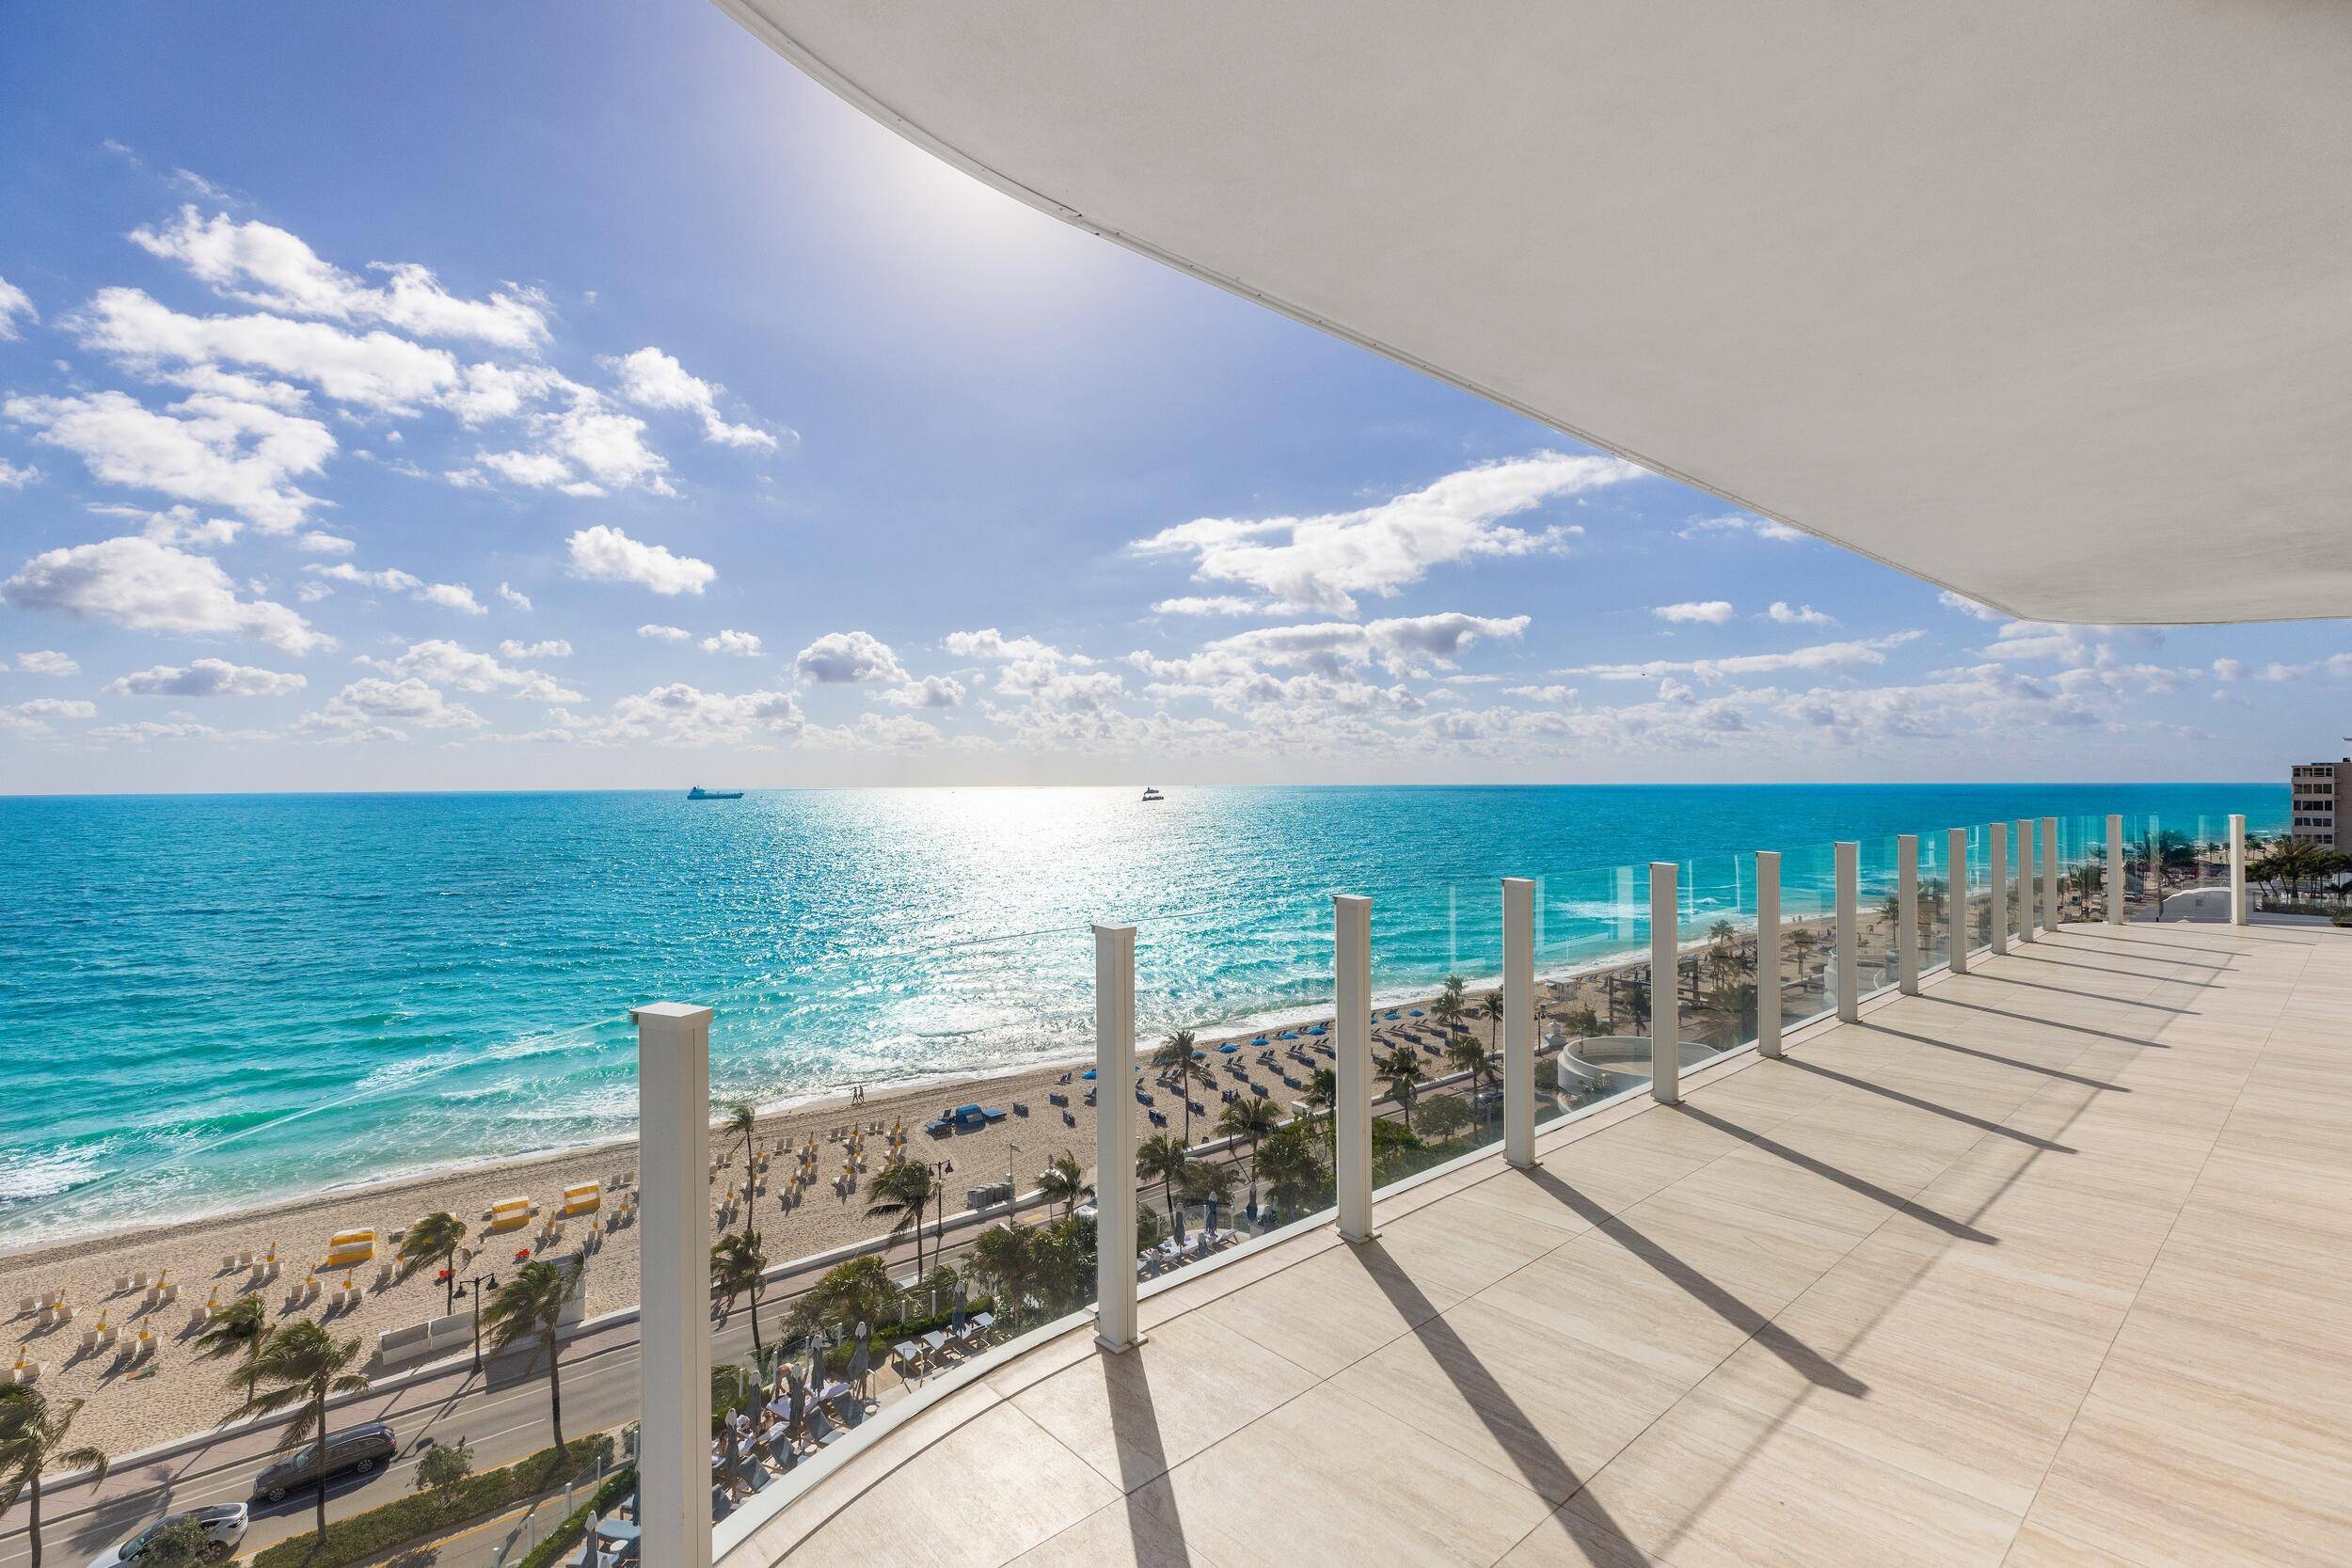 Newly built Four Seasons Private Residence Eighth floor, private residence with 2 bedroom, 2 1 2 bath and direct east facing exposure offering unparalleled ocean views.